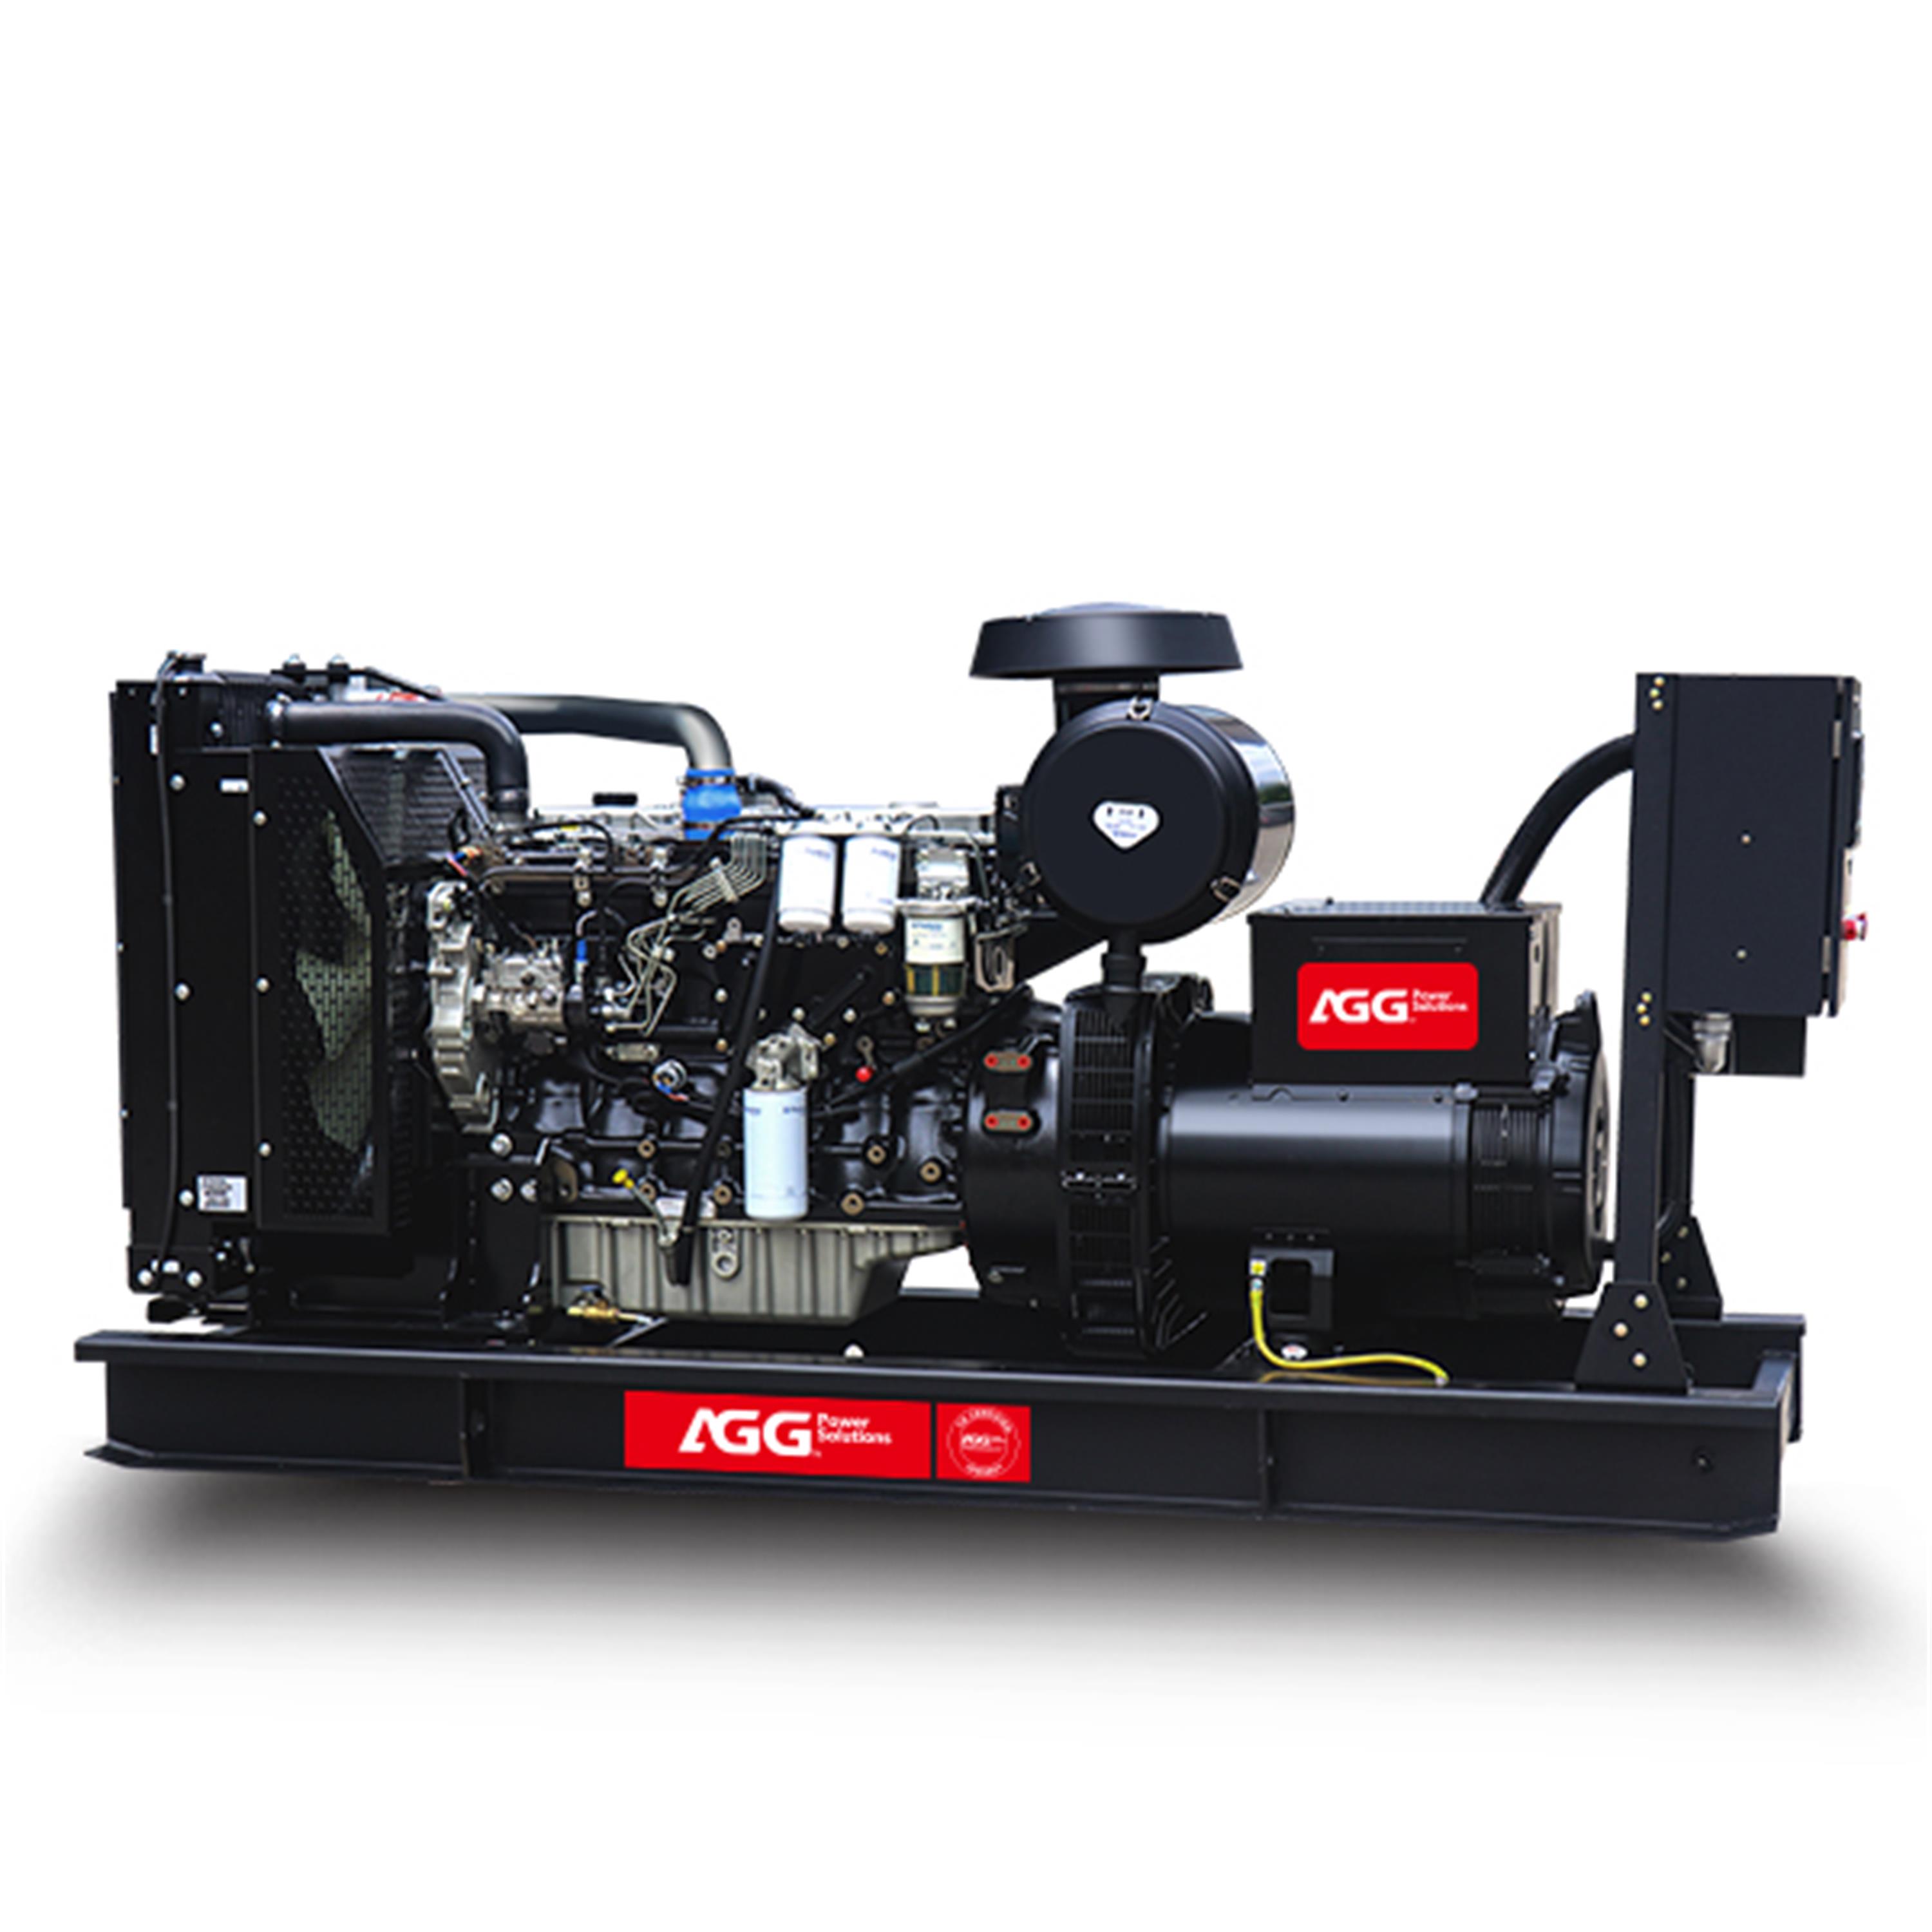 P1100D5-50HZ with 4008TAG2 - AGG Power Technology (UK) CO., LTD.